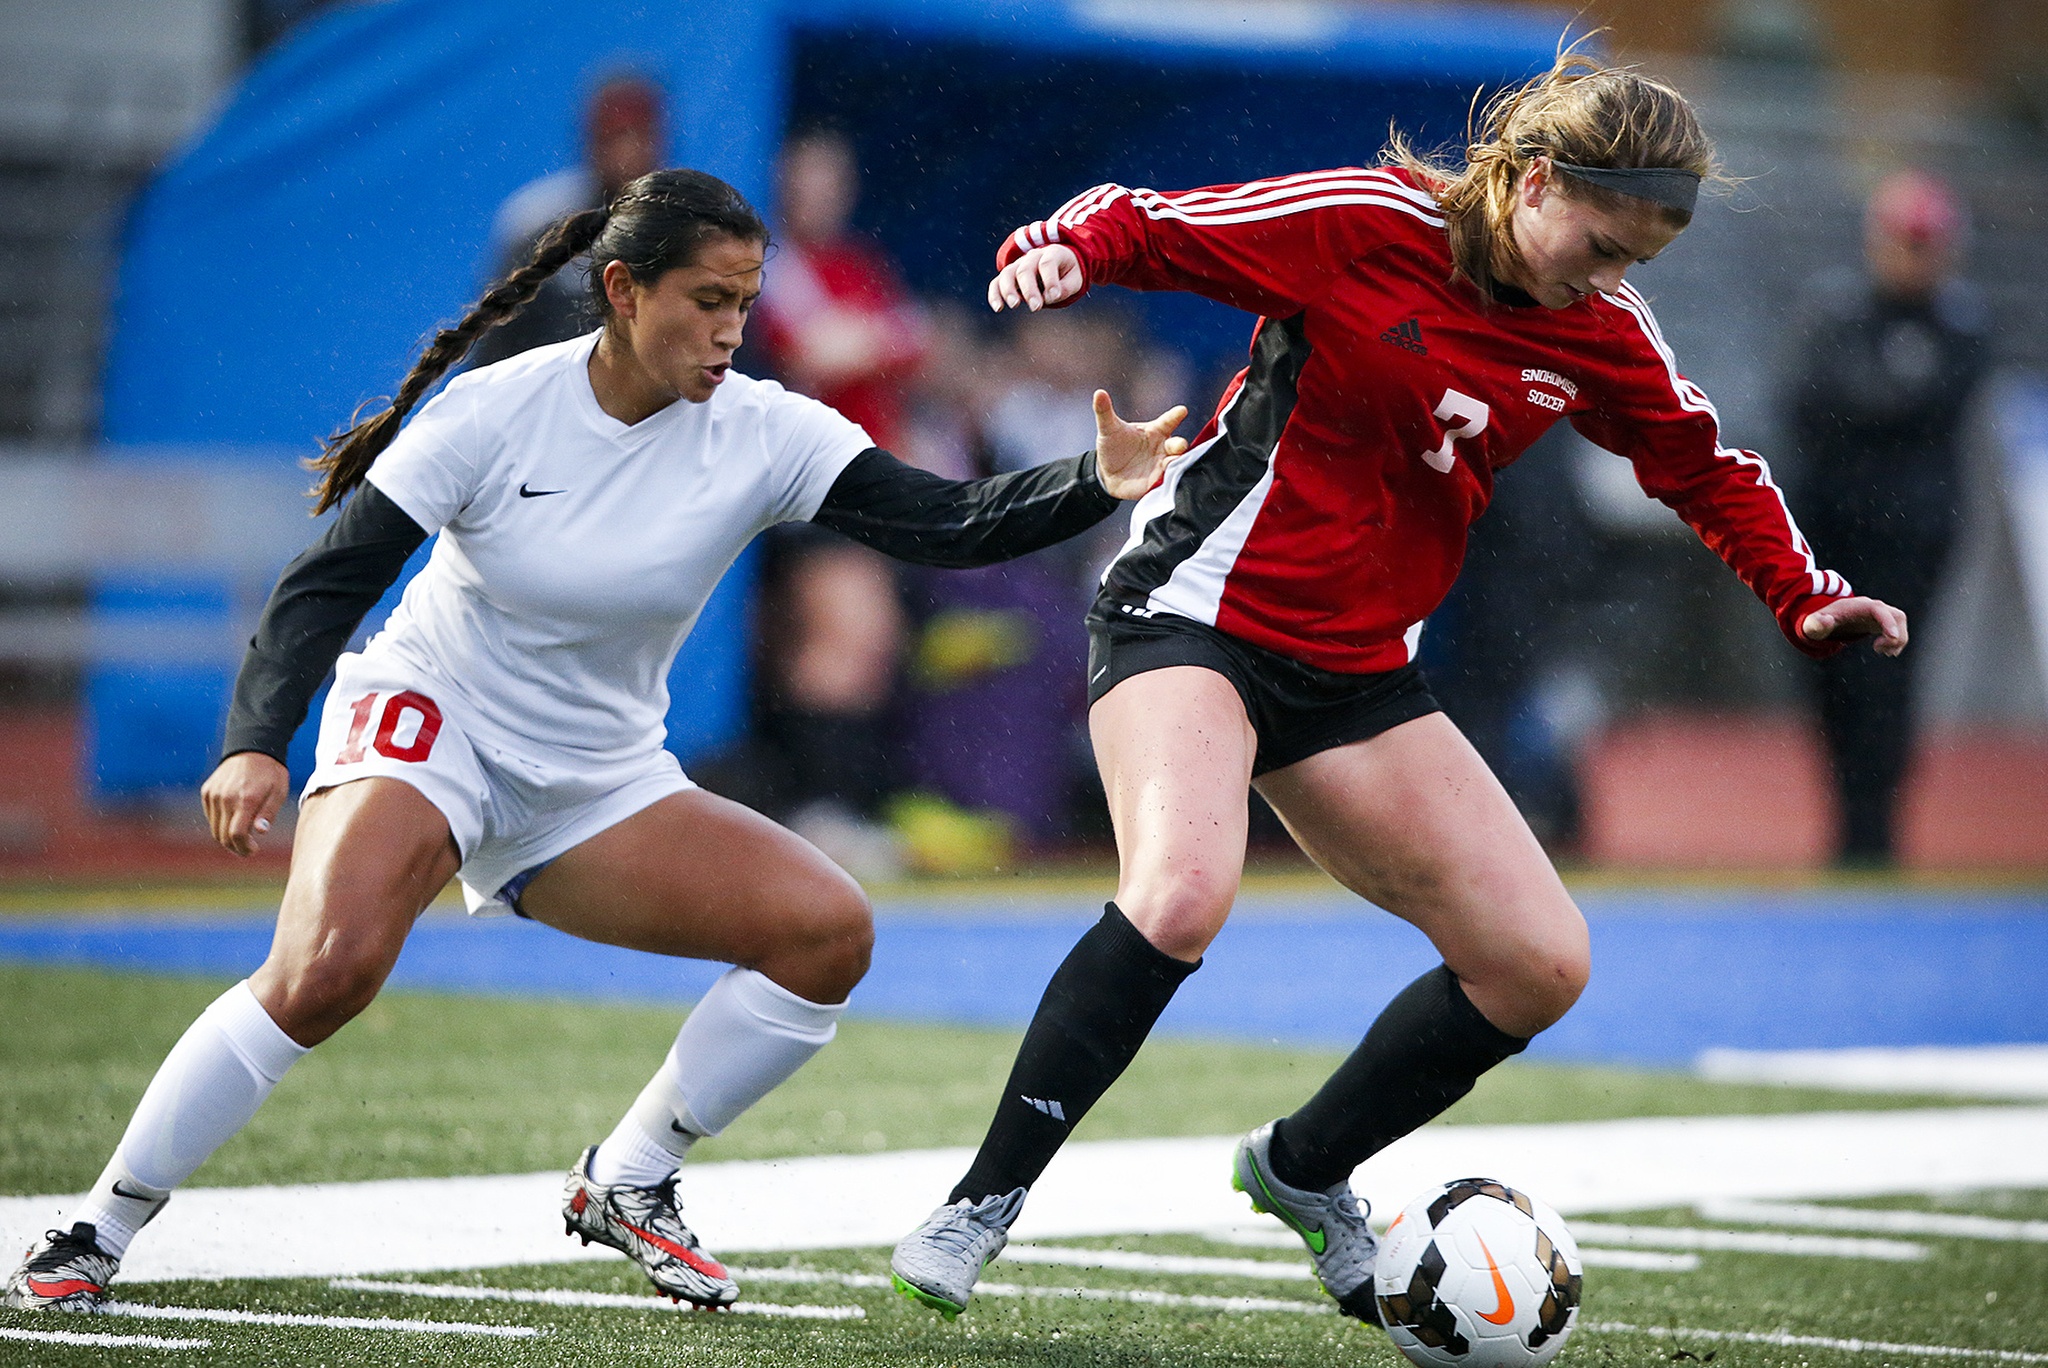 Snohomish’s Jada Edelbrock (7) controls the ball as Stanwood’s Espy Sanchez (10) defends during a district playoff game Tuesday at Shoreline Stadium. (Ian Terry / The Herald)